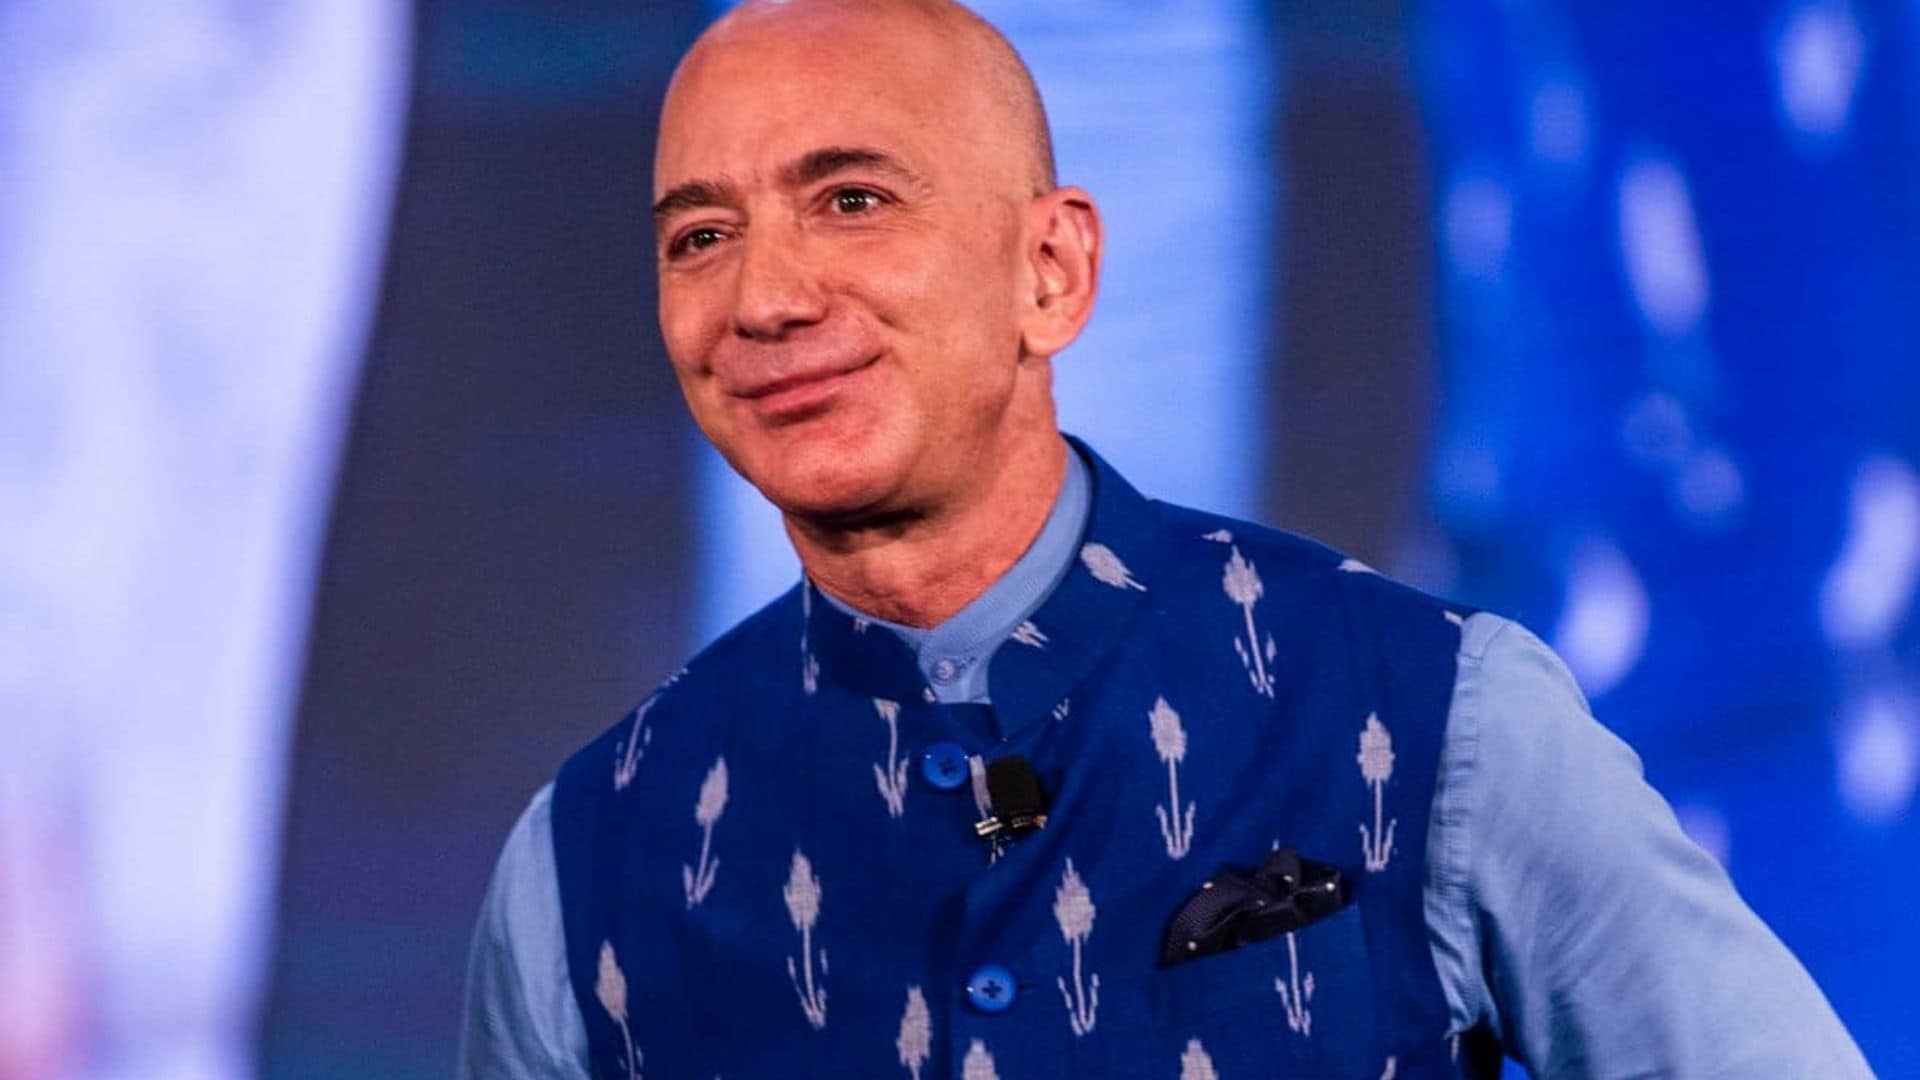 Jeff Bezos is no longer the richest person in the world